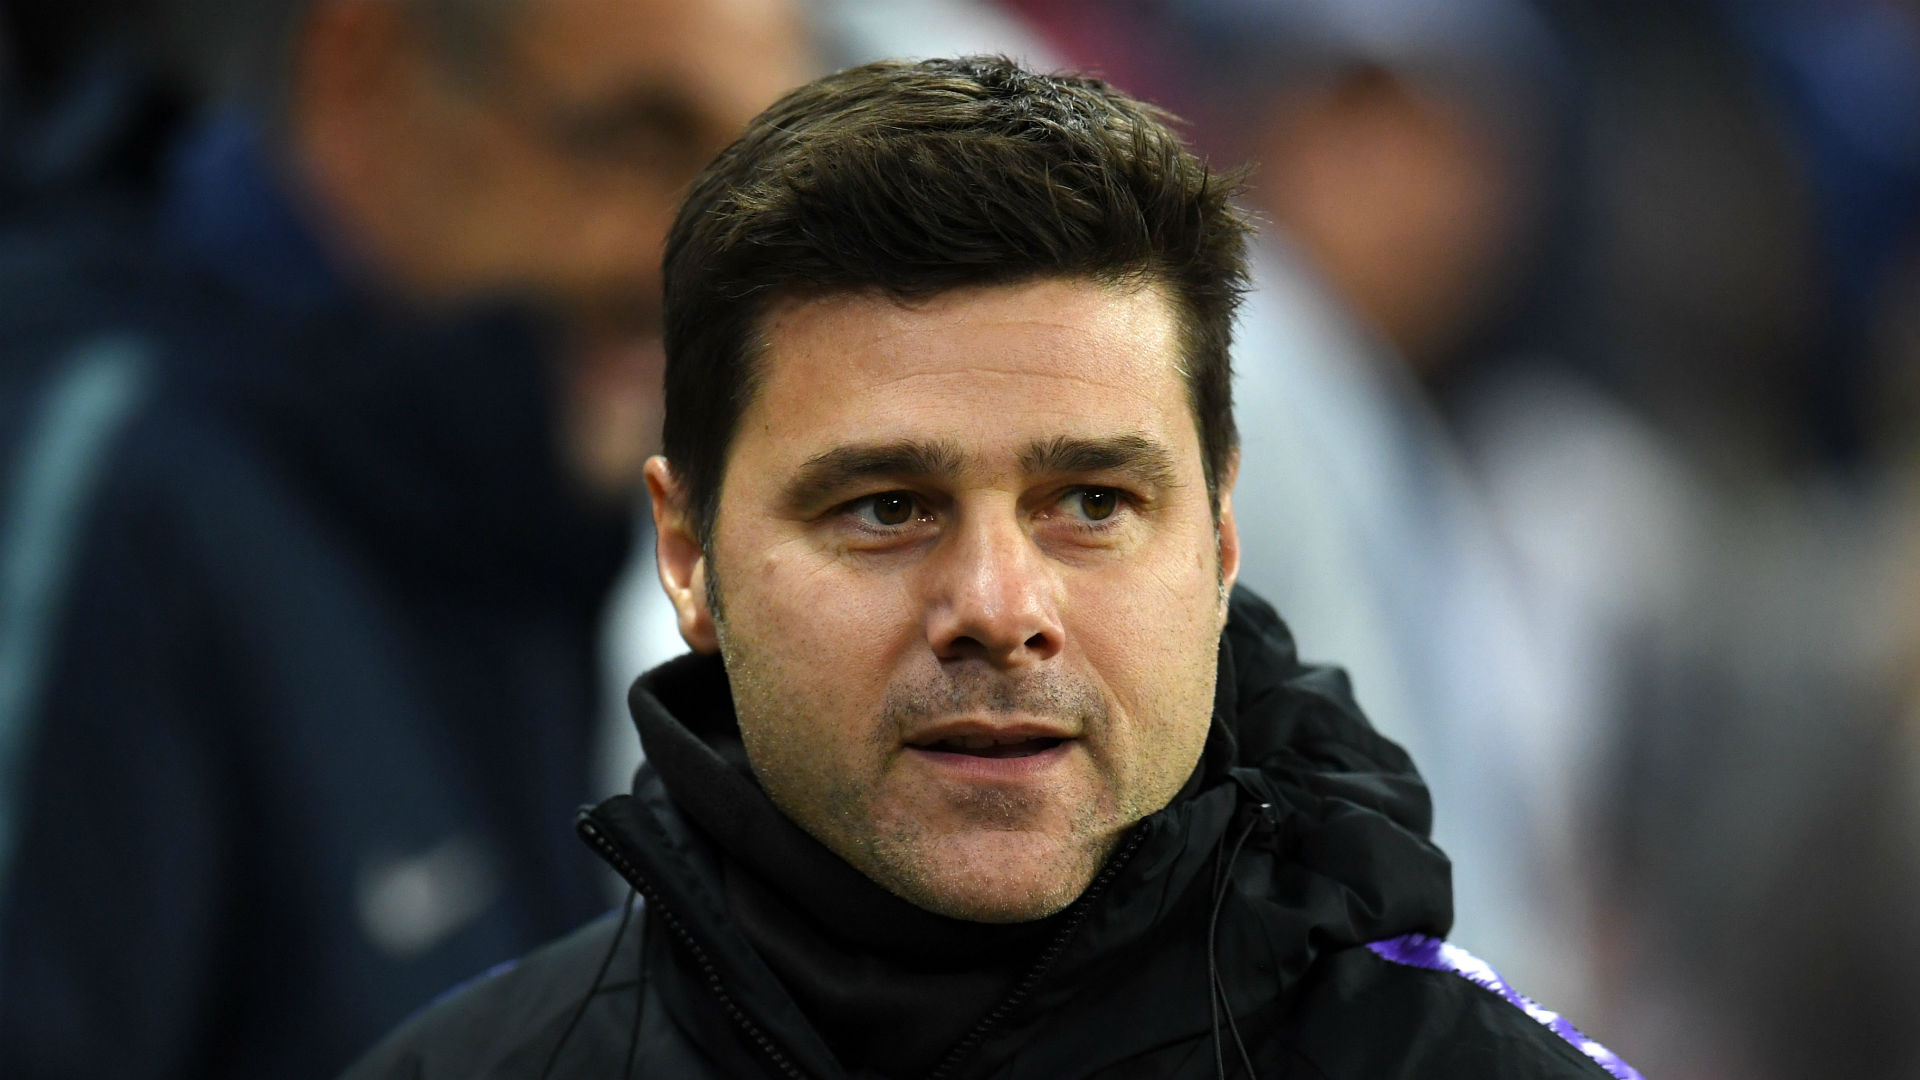 Tottenham's Argentine coach Mauricio Pochettino is a huge fan of Wembley and of English culture in general.